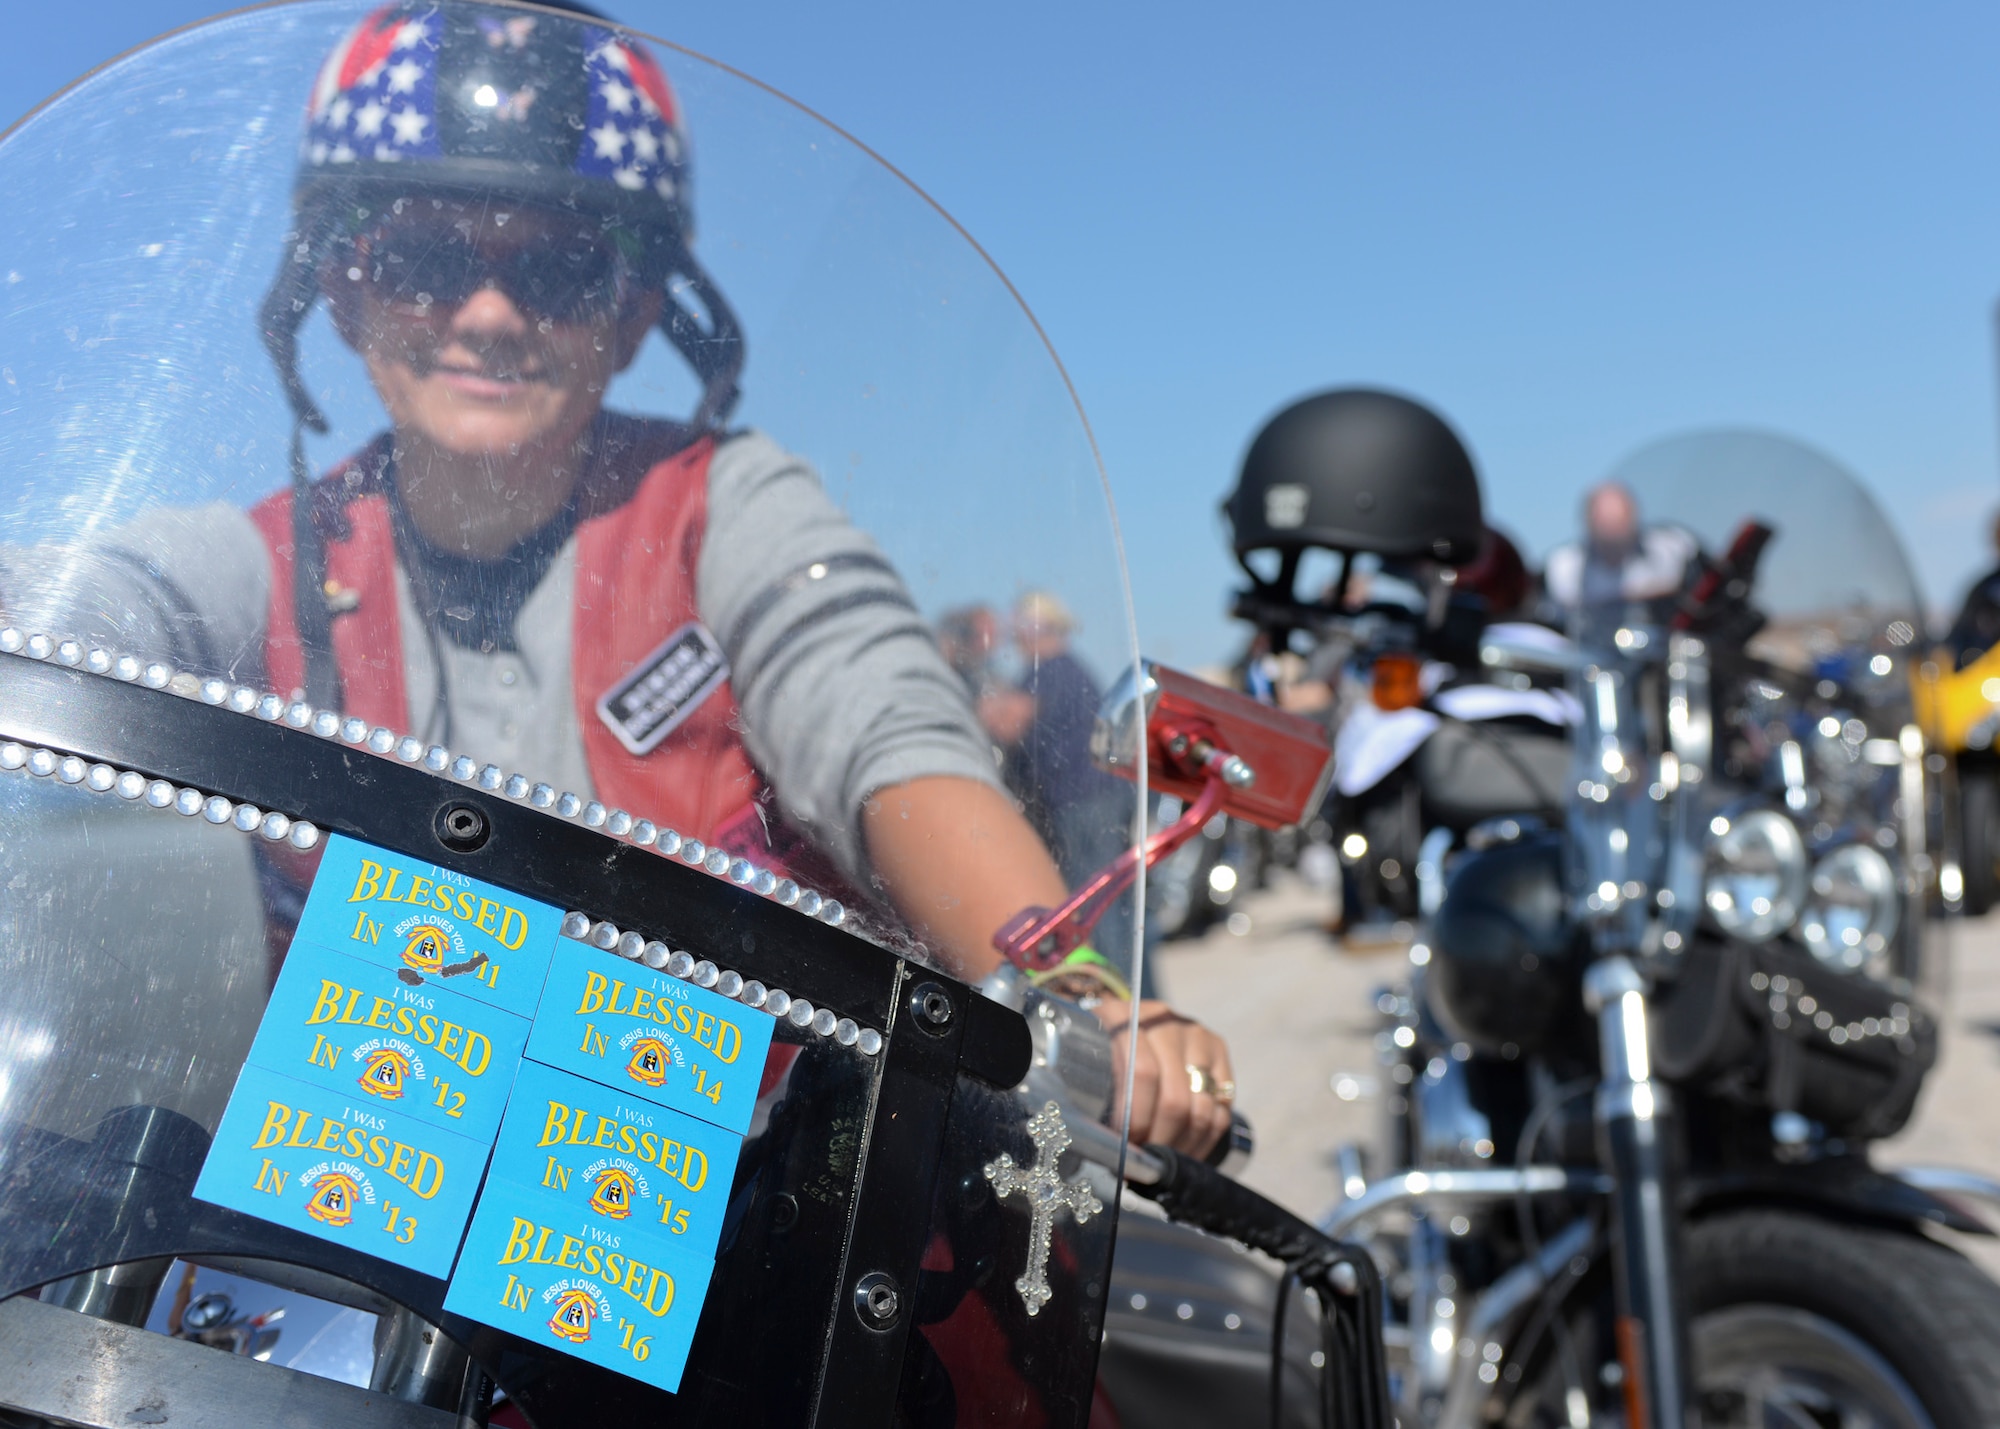 Mary Faatz, motorcycle enthusiast from Rapid City, S.D., parks her motorcycle outside the Pride Hangar during the 16th Annual Dakota Thunder Run at Ellsworth Air Force Base, S.D., Aug. 9, 2016. Faatz has been participating in the ride with her sisters for six consecutive years and displays proudly the blessed stickers she has accumulated each year she has ridden in this event. (U.S. Air Force photo by Senior Airman Anania Tekurio/Released)